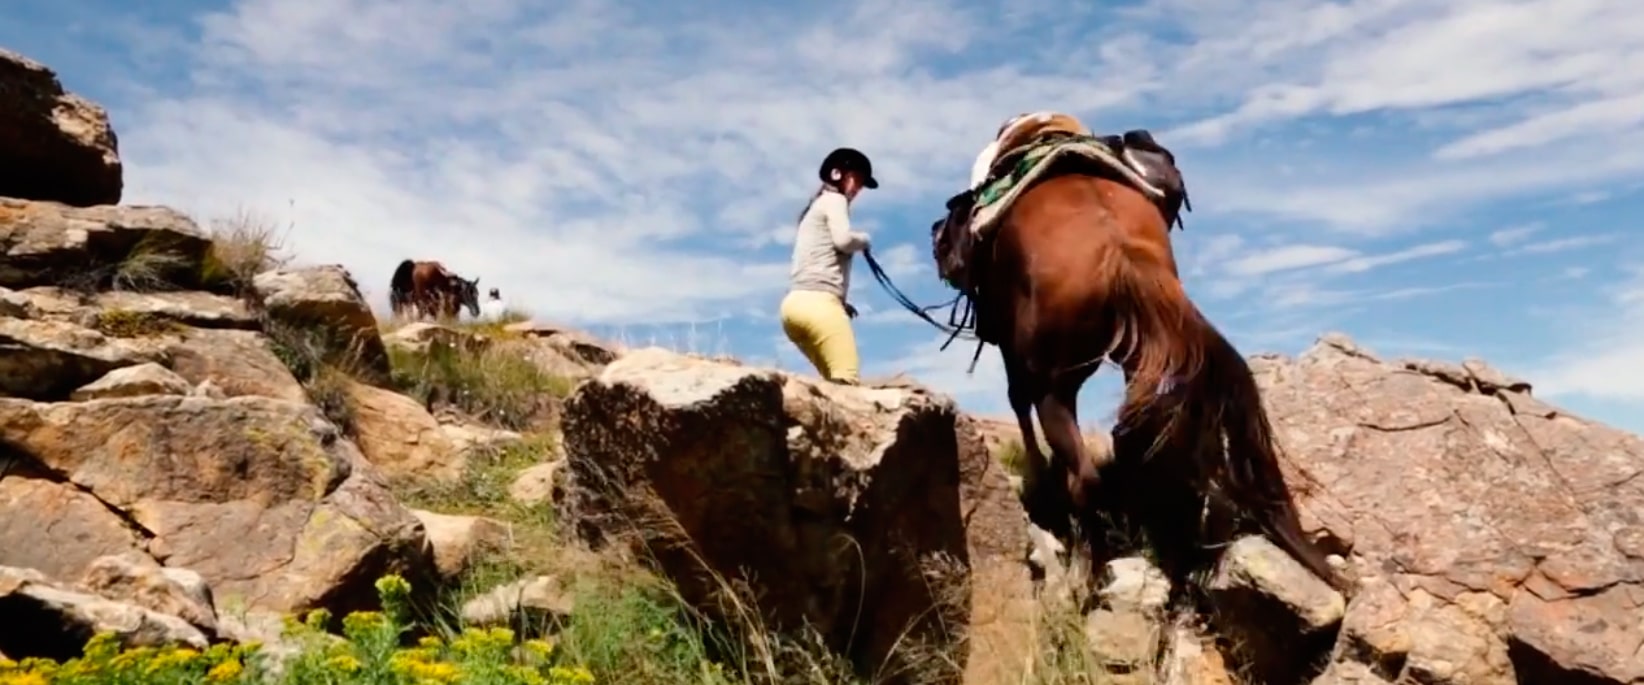 Horseback expeditions in Lesotho